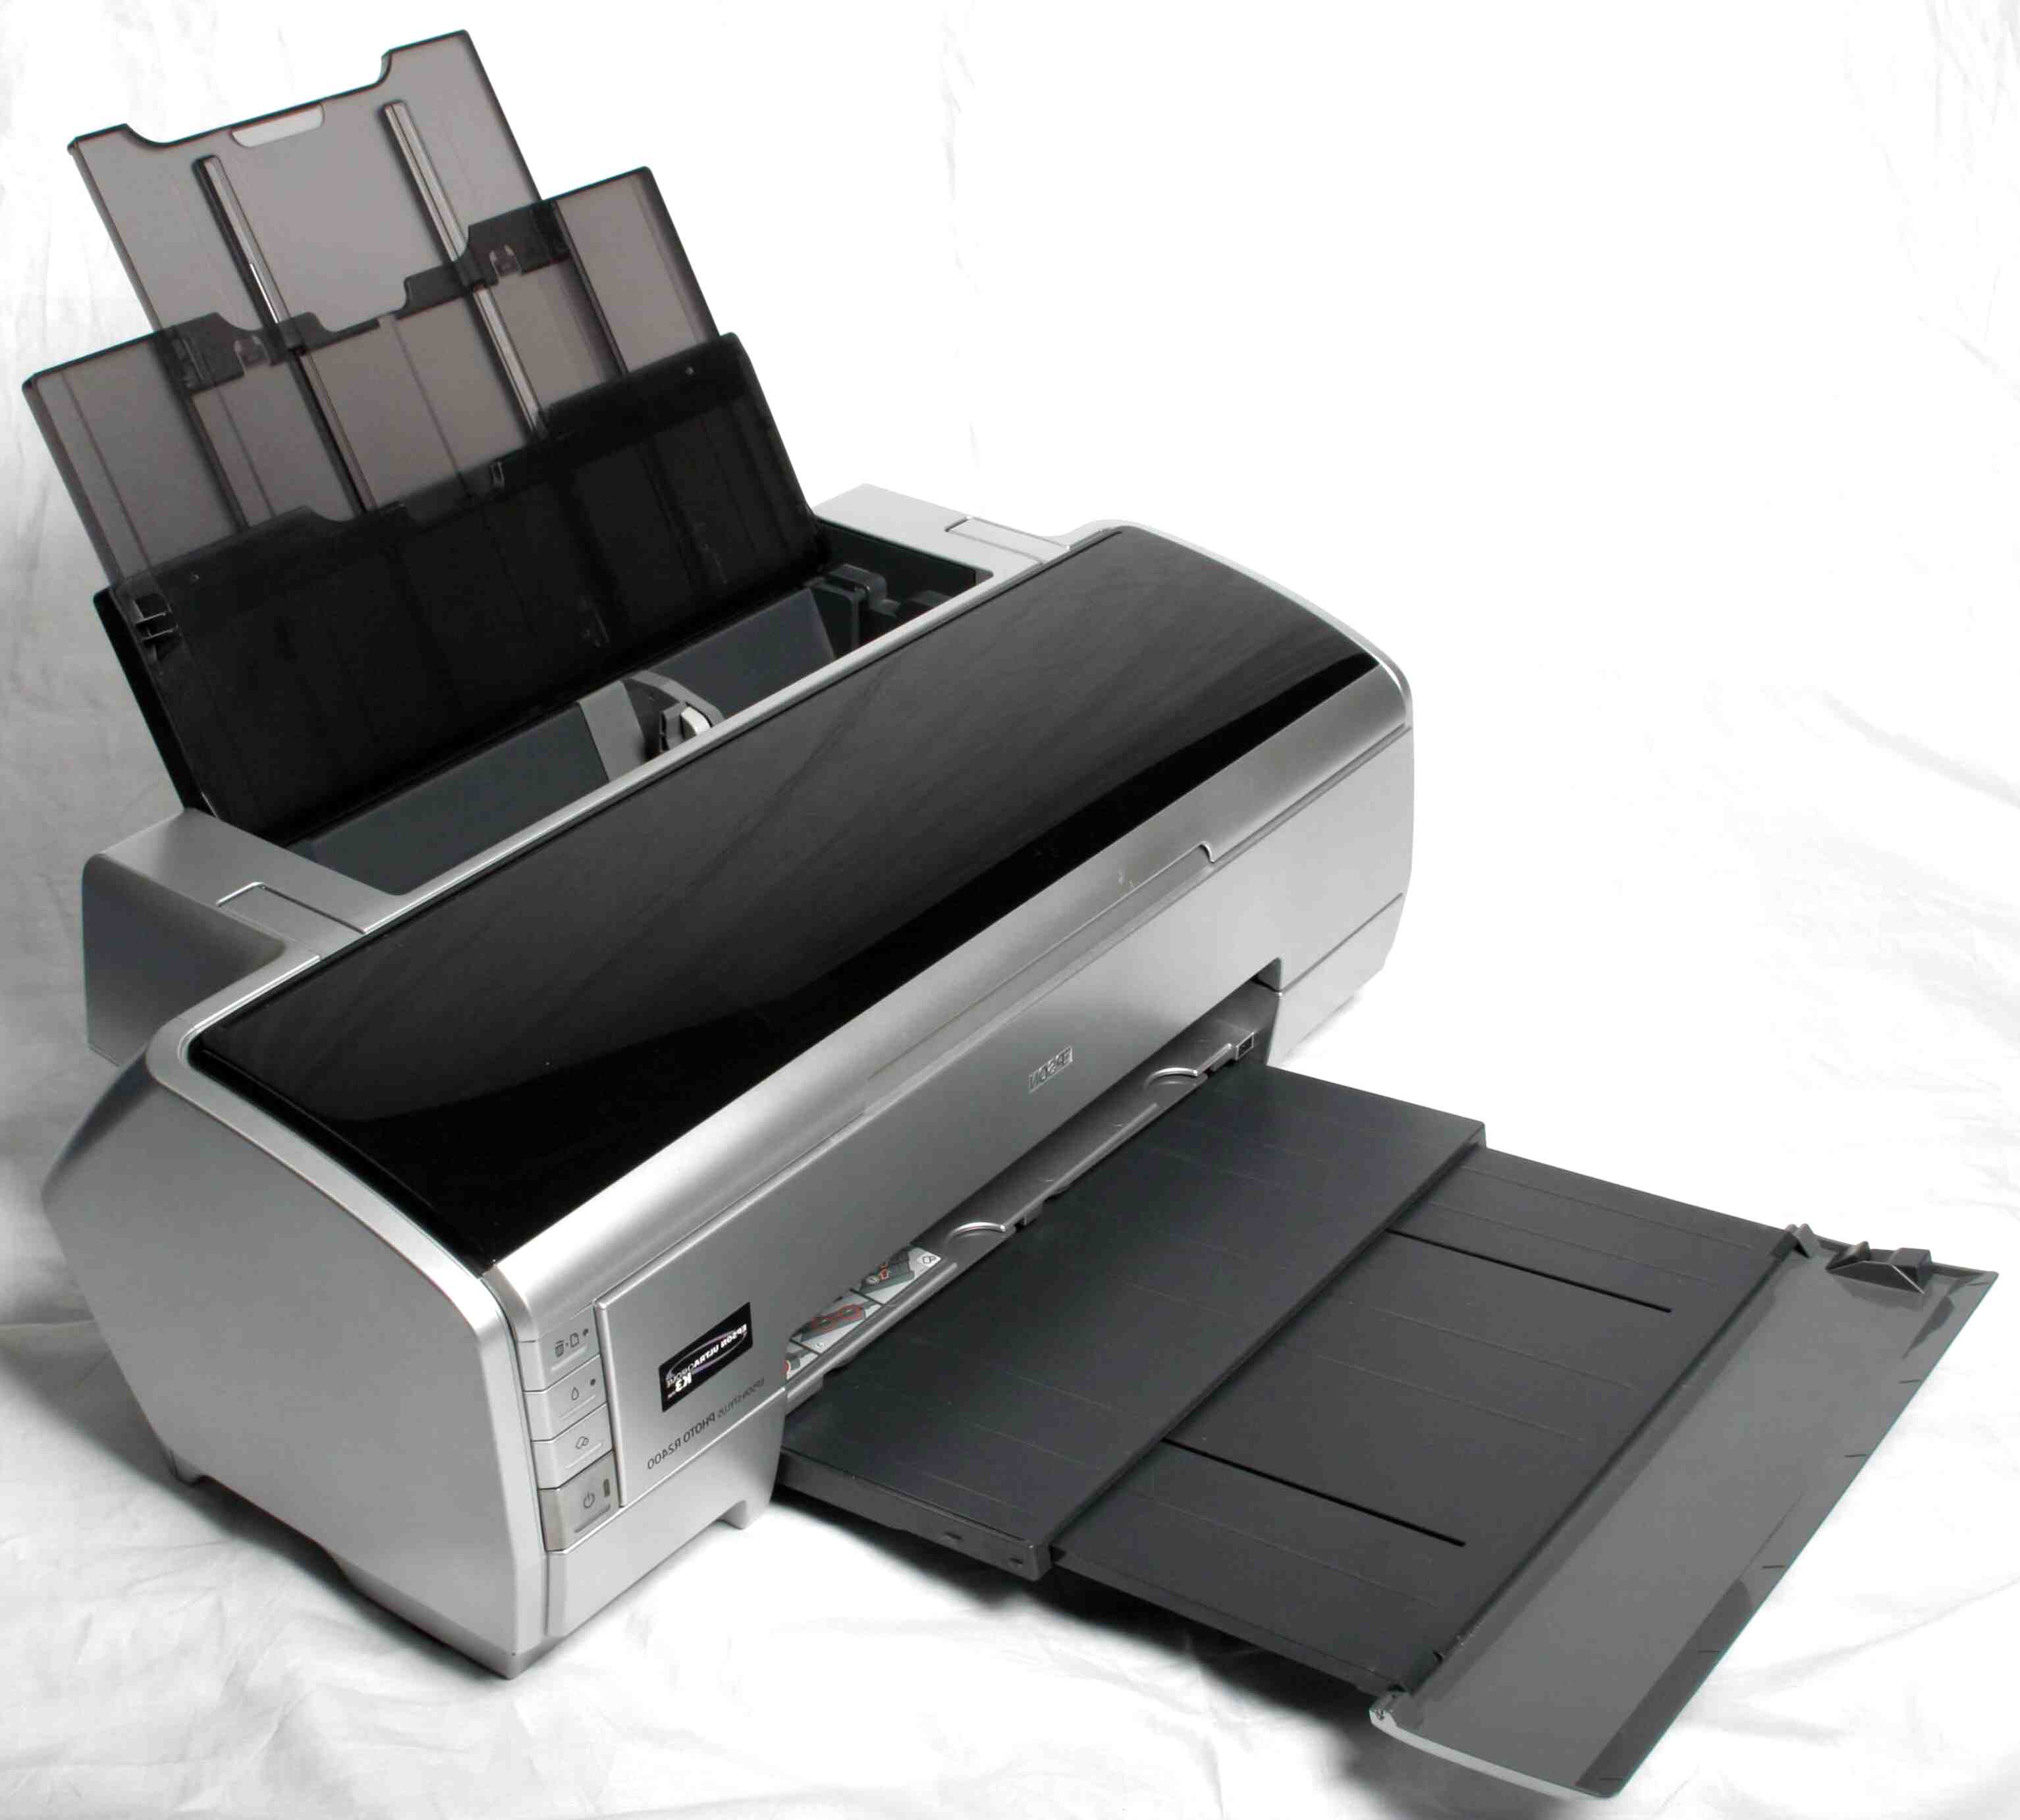  Epson R1800  Printer for sale in UK View 57 bargains